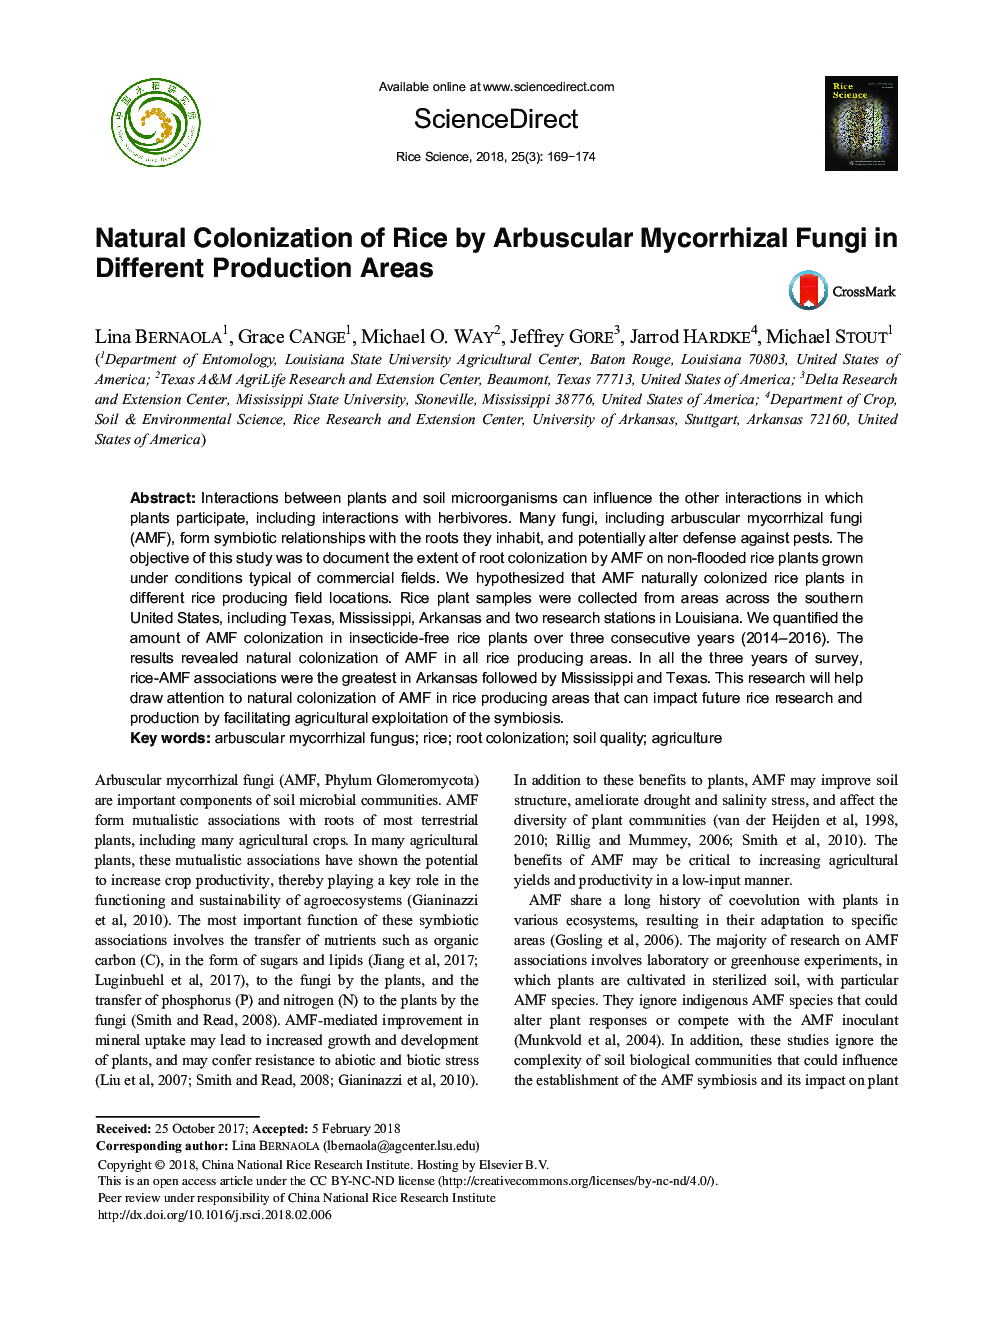 Natural Colonization of Rice by Arbuscular Mycorrhizal Fungi in Different Production Areas